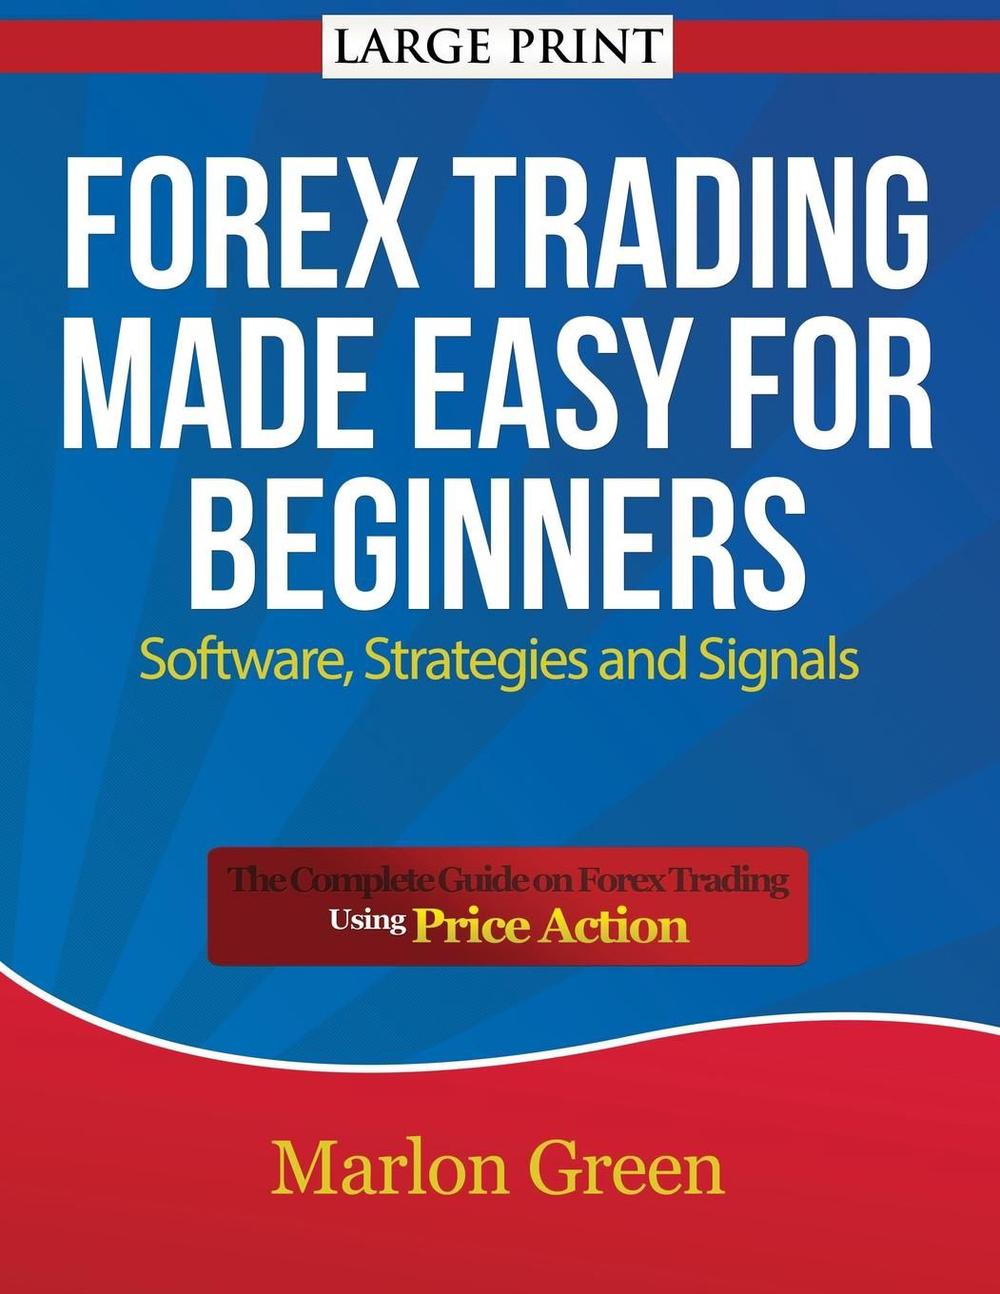 forex trading for beginners made easy